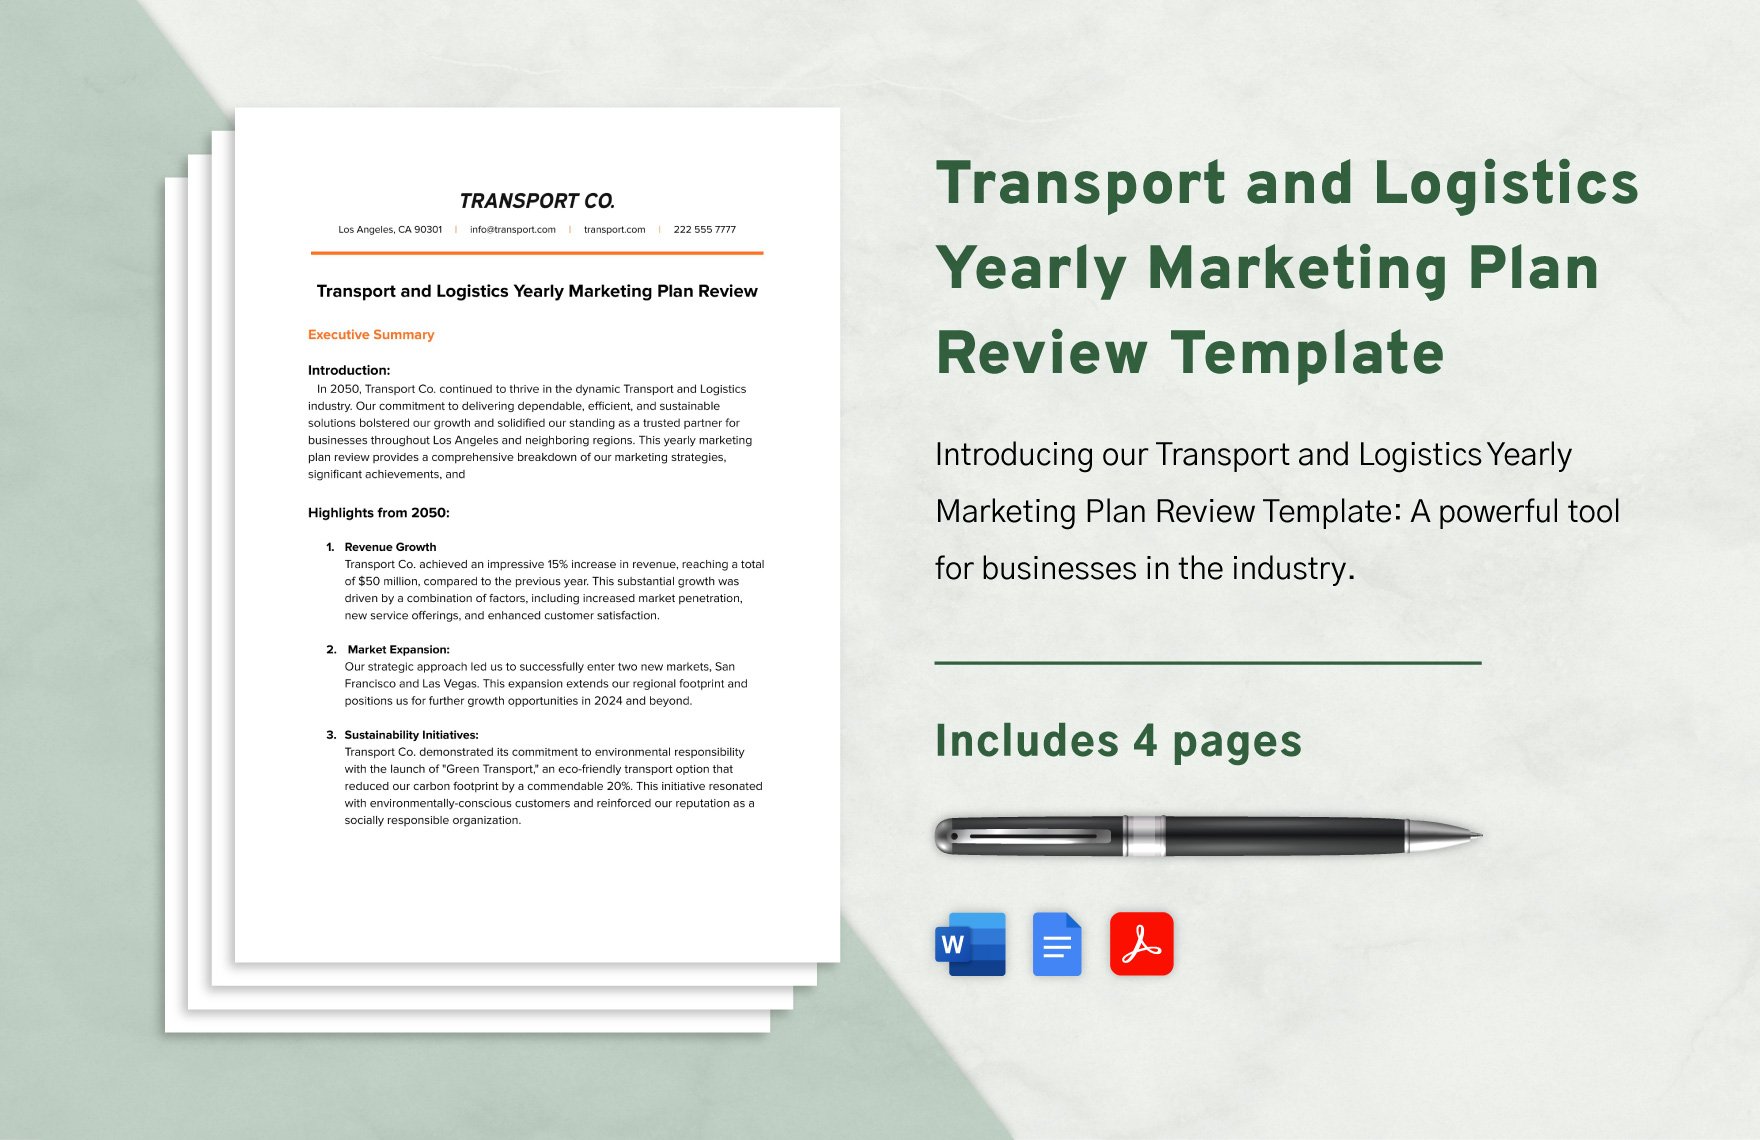 Transport and Logistics Yearly Marketing Plan Review Template in Word, Google Docs, PDF